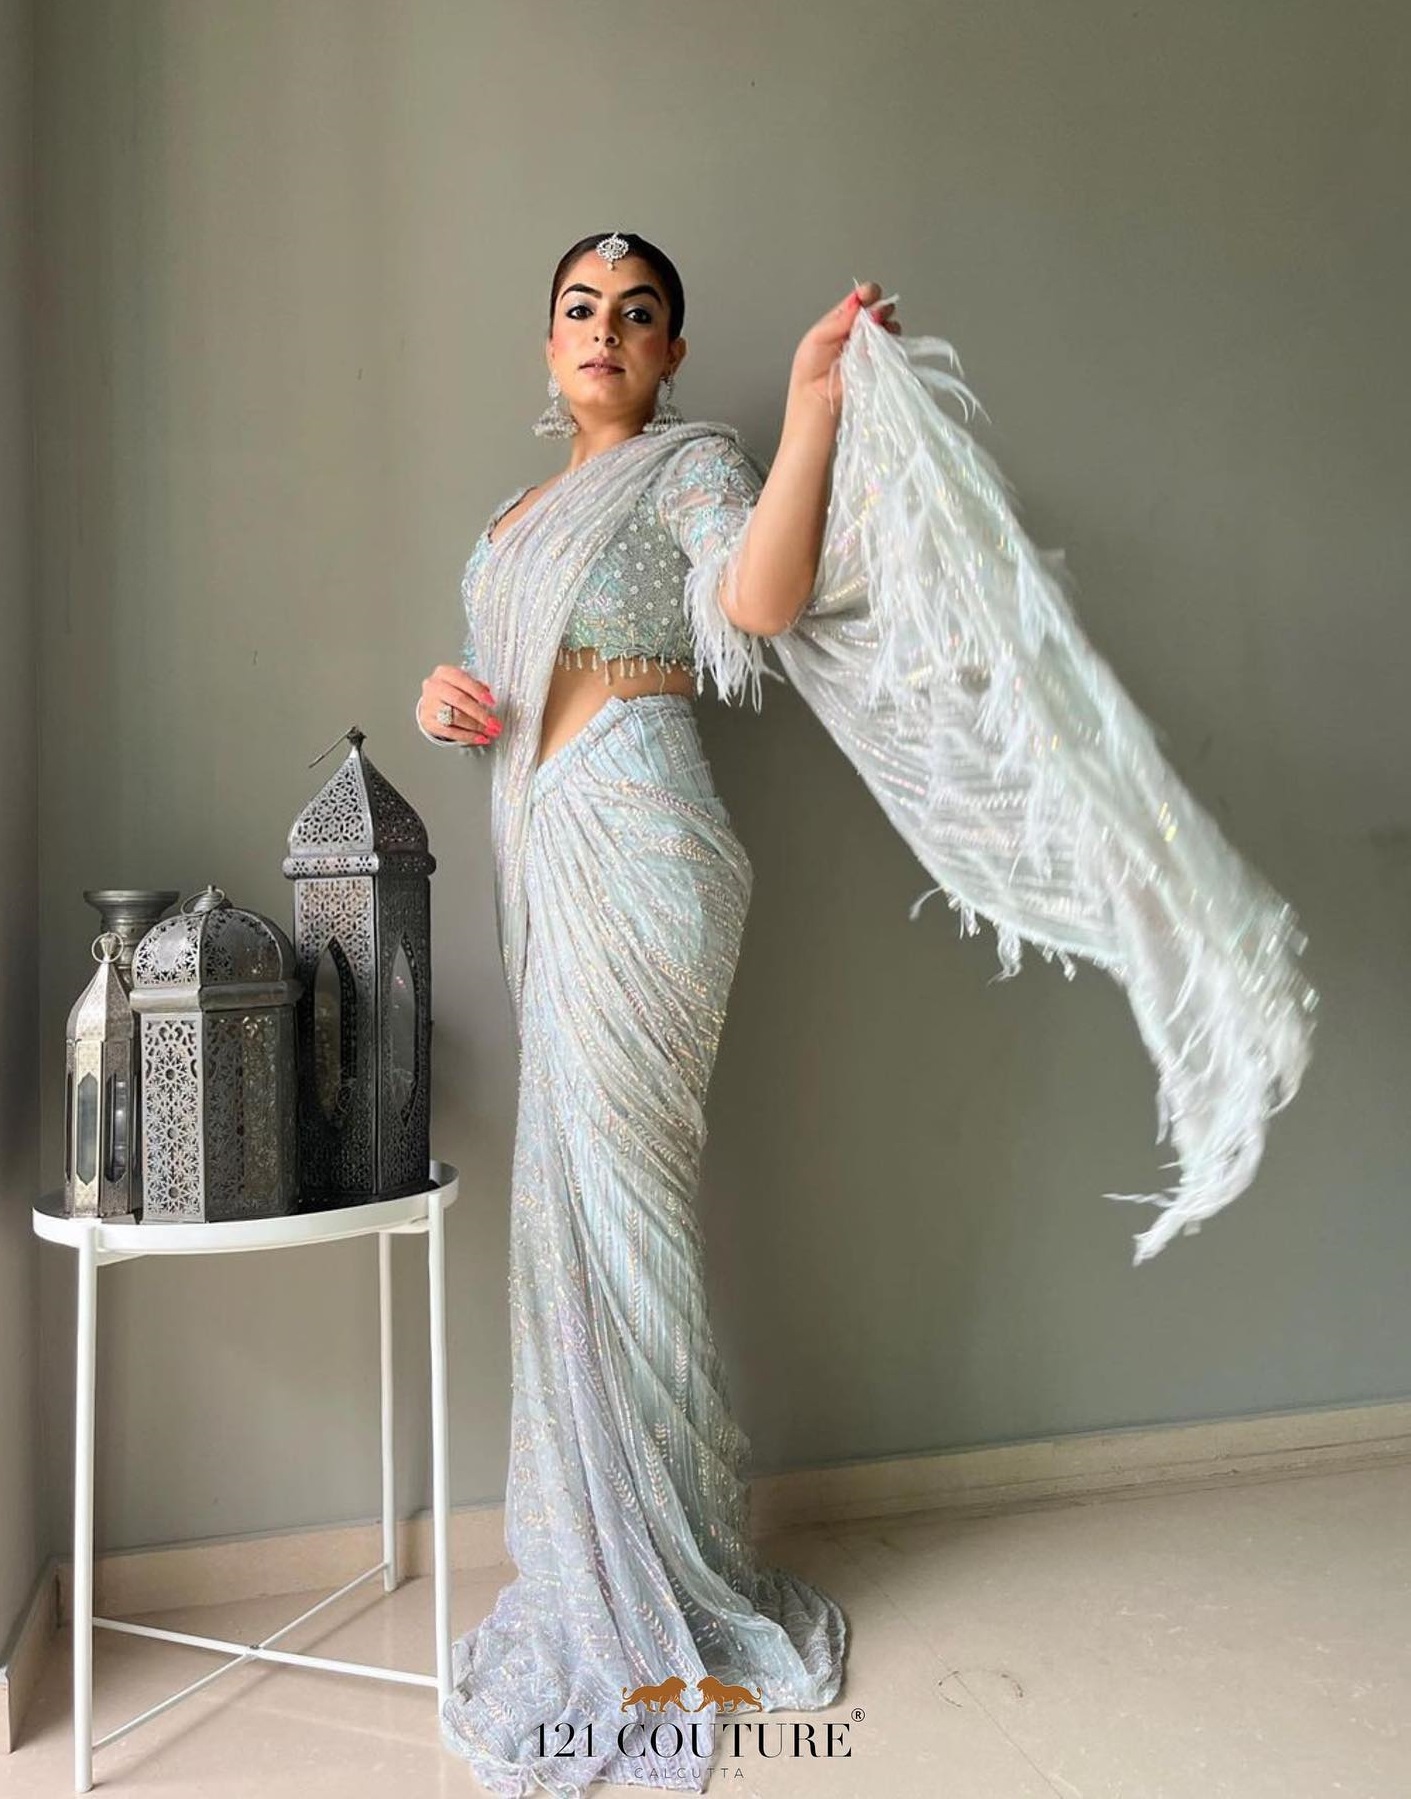 8 Celebrities And Influencers Slaying In 121 Couture’s Finest Outfits